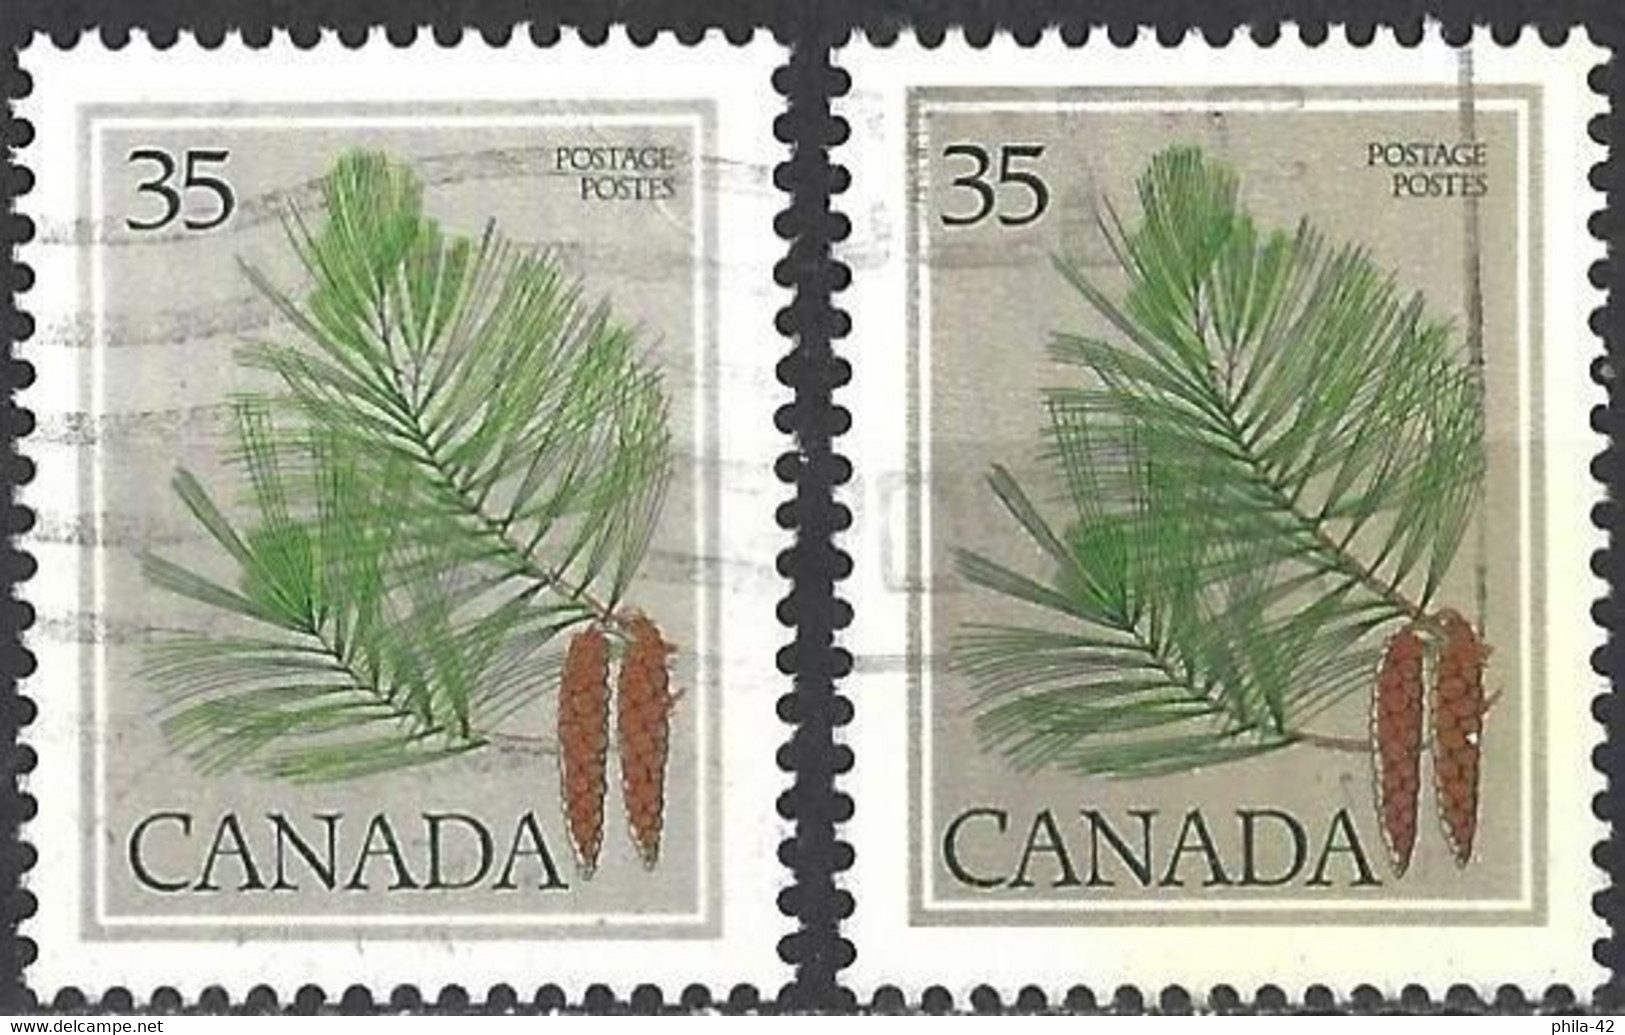 Canada 1979 - Mi 719 - YT 698 ( Eastern White Pine ) Two Shades Of Color - Errors, Freaks & Oddities (EFO)